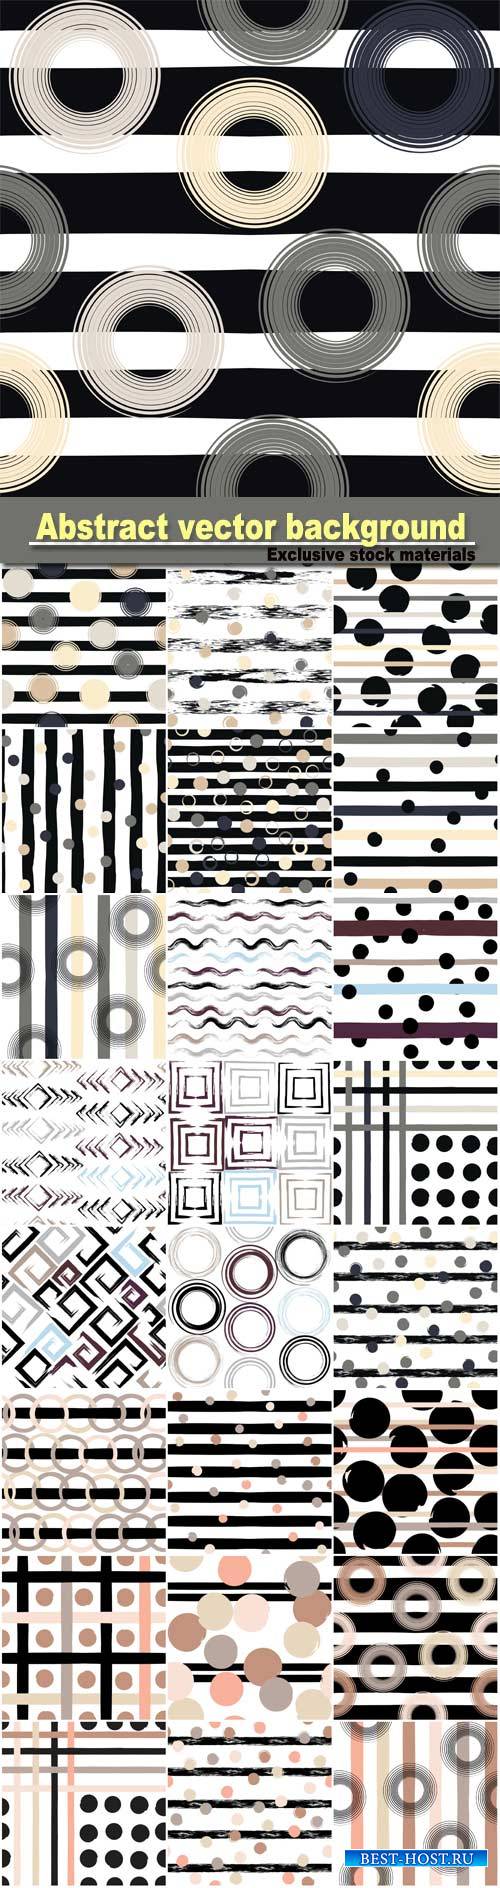 Abstract vector background with circles and squares